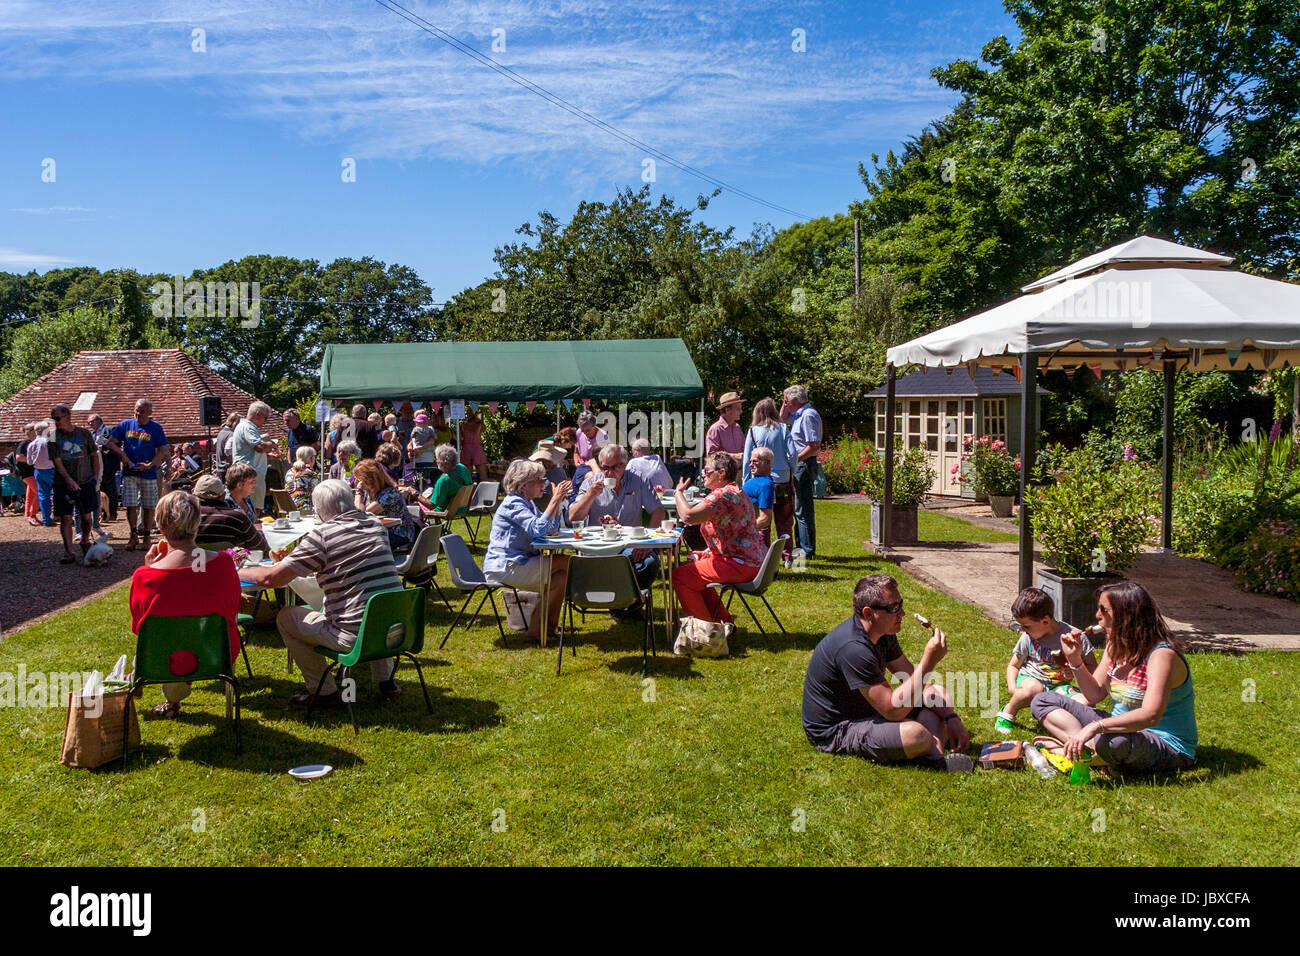 People Enjoying Cream Teas On The Lawns Of Chiddingly Vicarage During The Annual Chiddingly Fete, Chiddingly, Sussex, UK Stock Photo